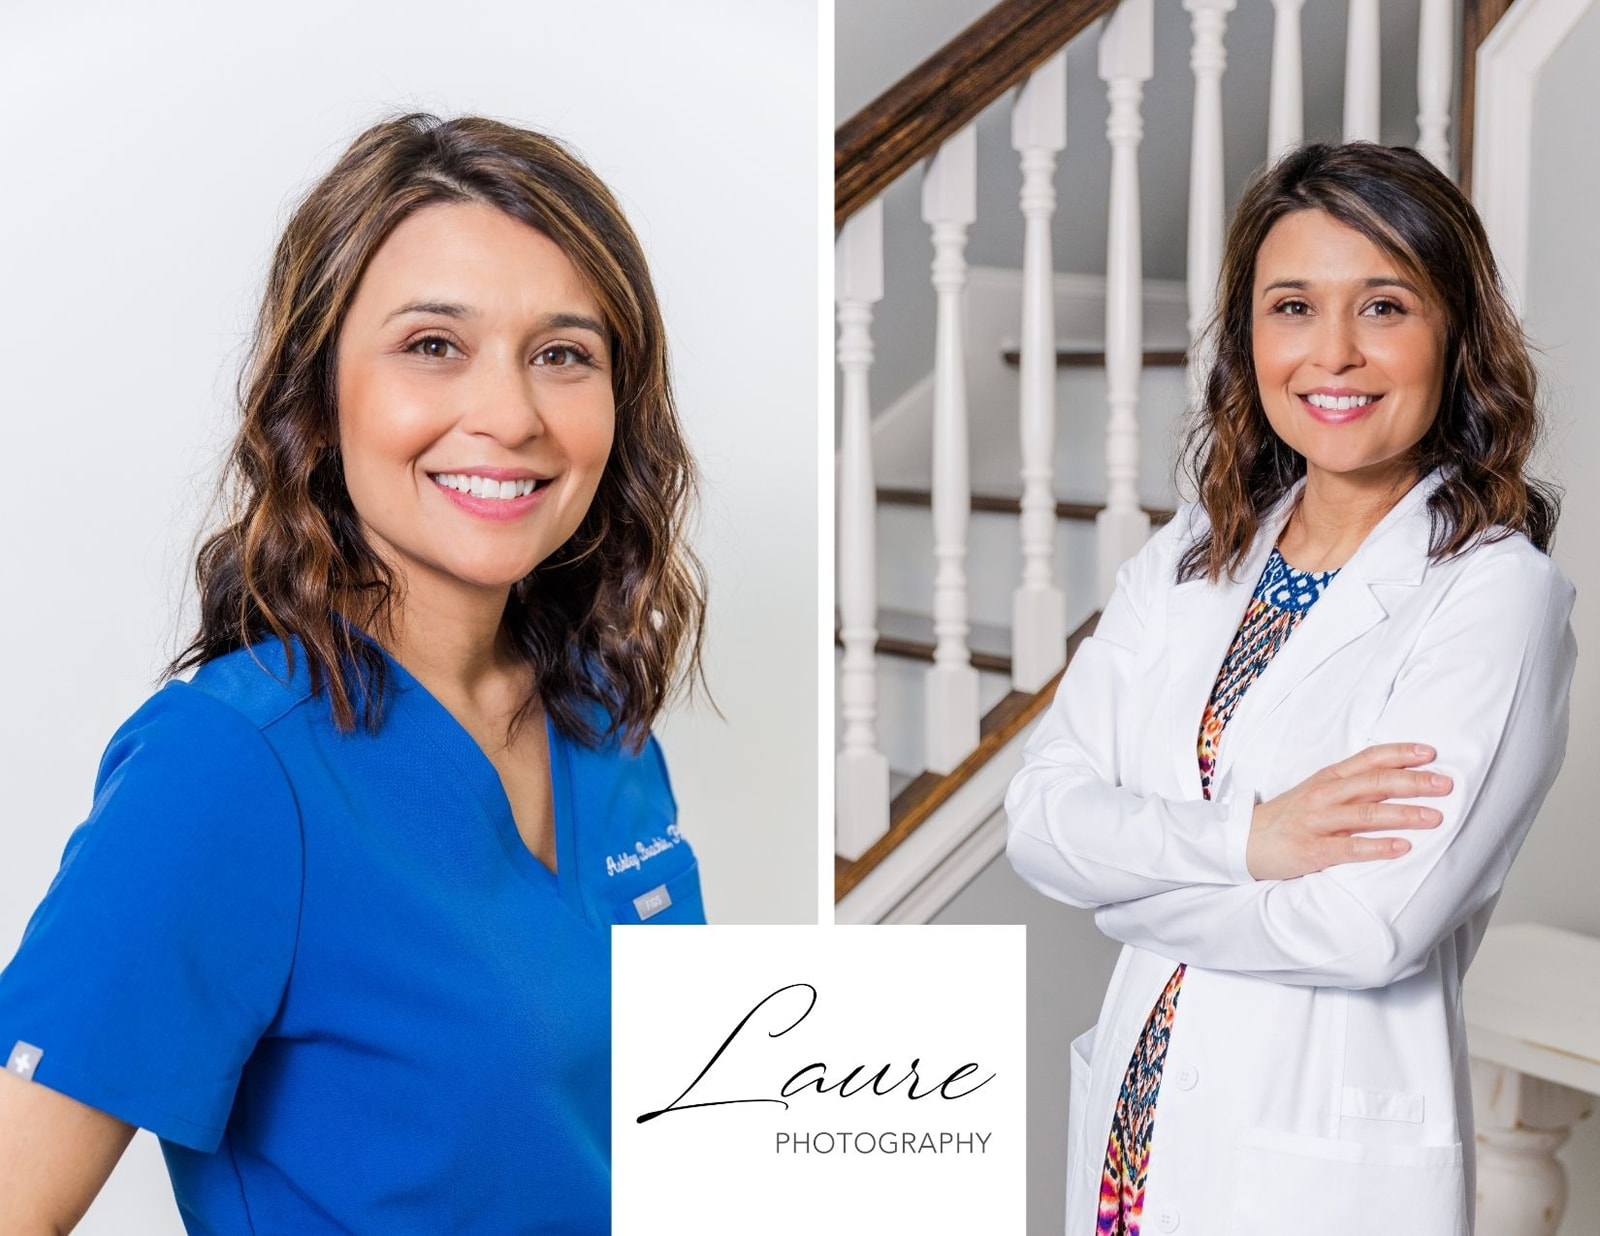 headshots doctor in different poses background and outfit scrubs and white blouse by Laure Photography